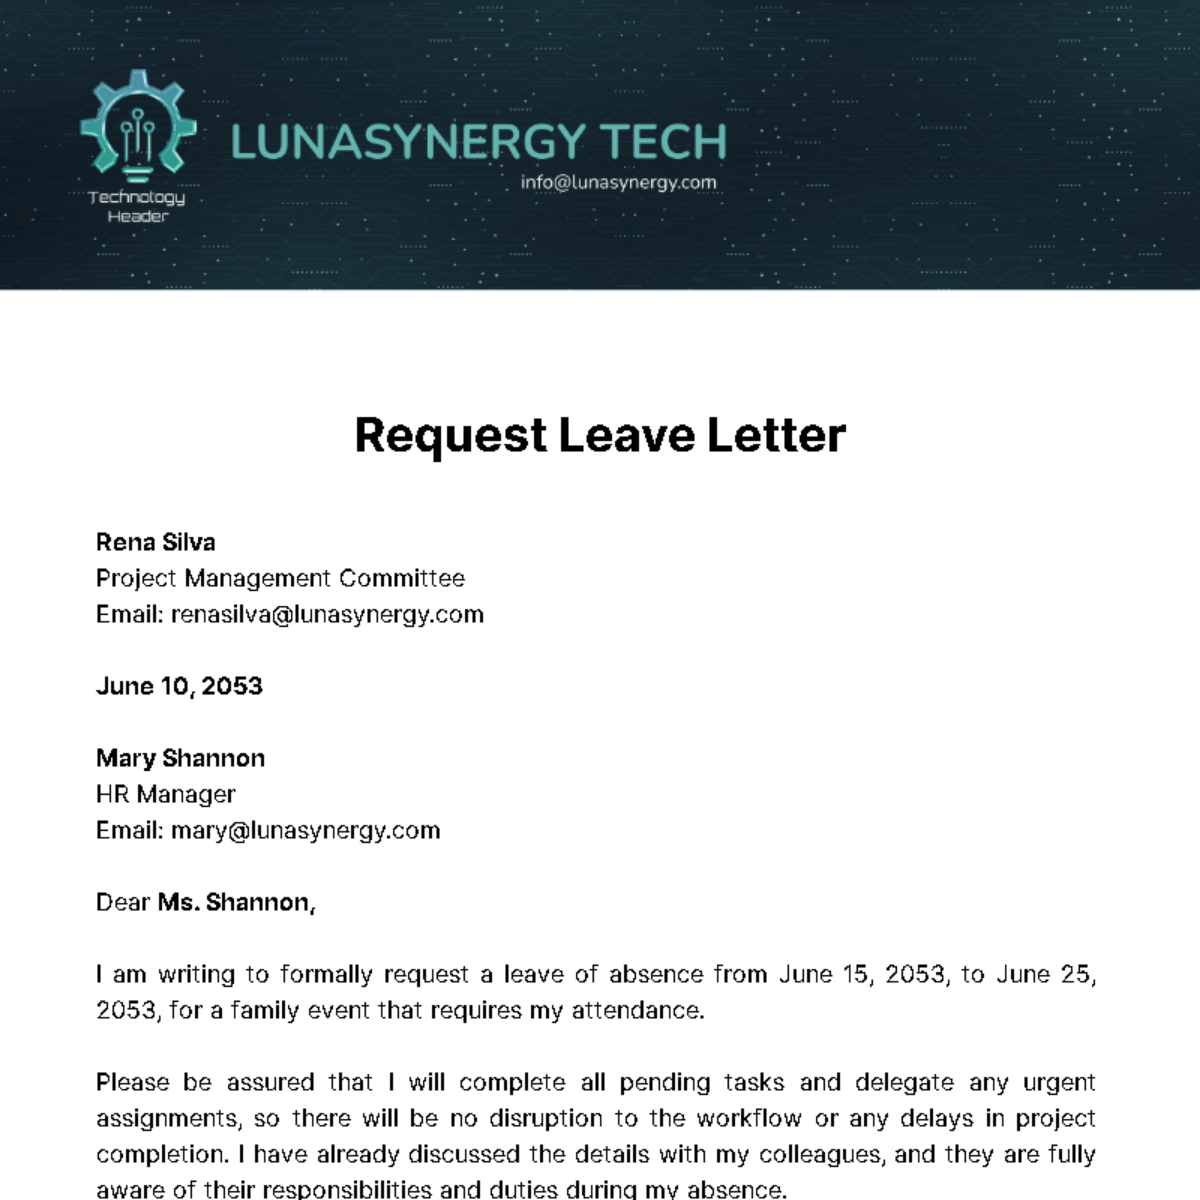 Request Leave Letter Template